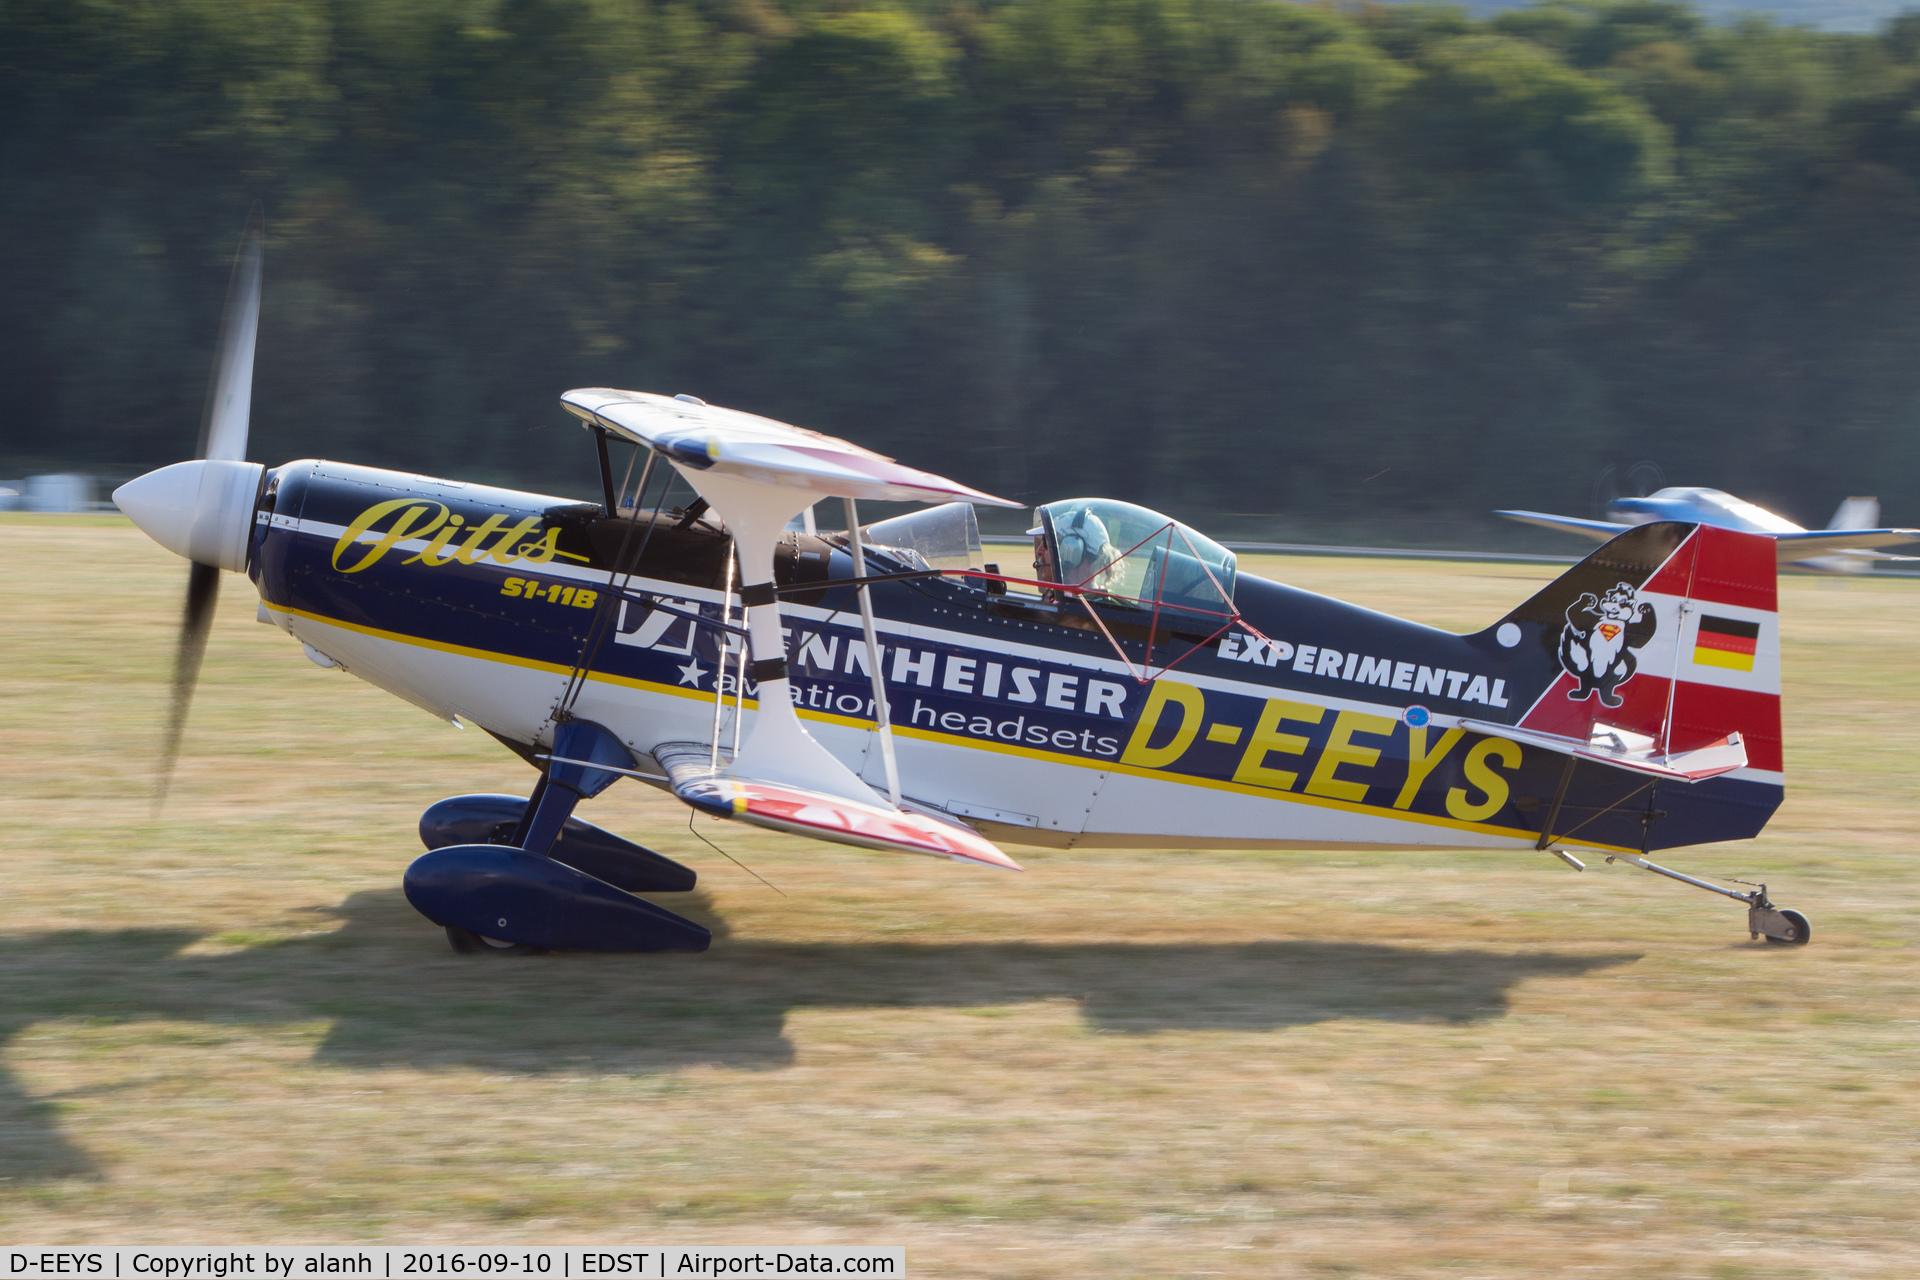 D-EEYS, 2005 Pitts S-1-11 Super Stinker C/N 479, Taxying for departure at the 2016 Hahnweide Oldtimer Fliegertreffen